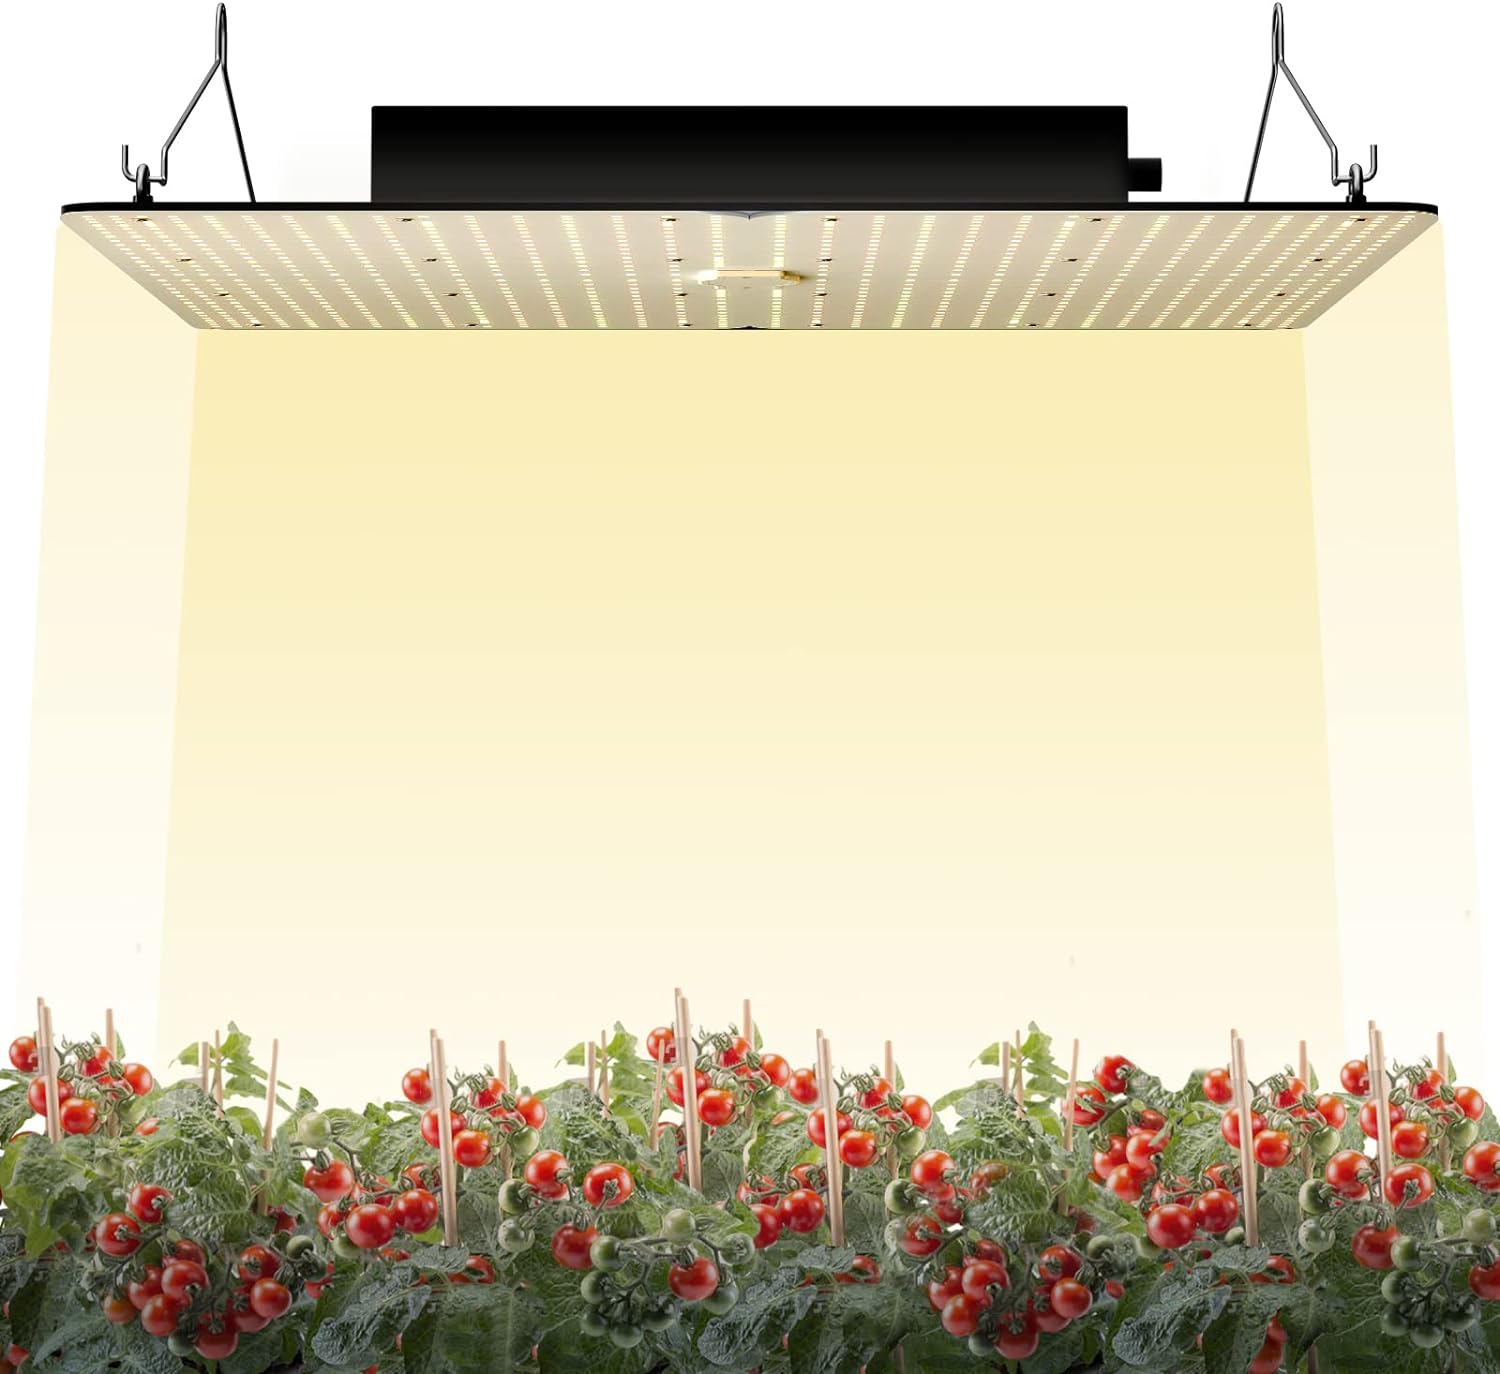 VEVOR LED Grow Light Full Spectrum Dimmable with Samsung 281B+PRO Chips High Yield Growing Lamp for Indoor Plants Daisy Chain Driver ETL Certified for 5x5 ft Grow Tent